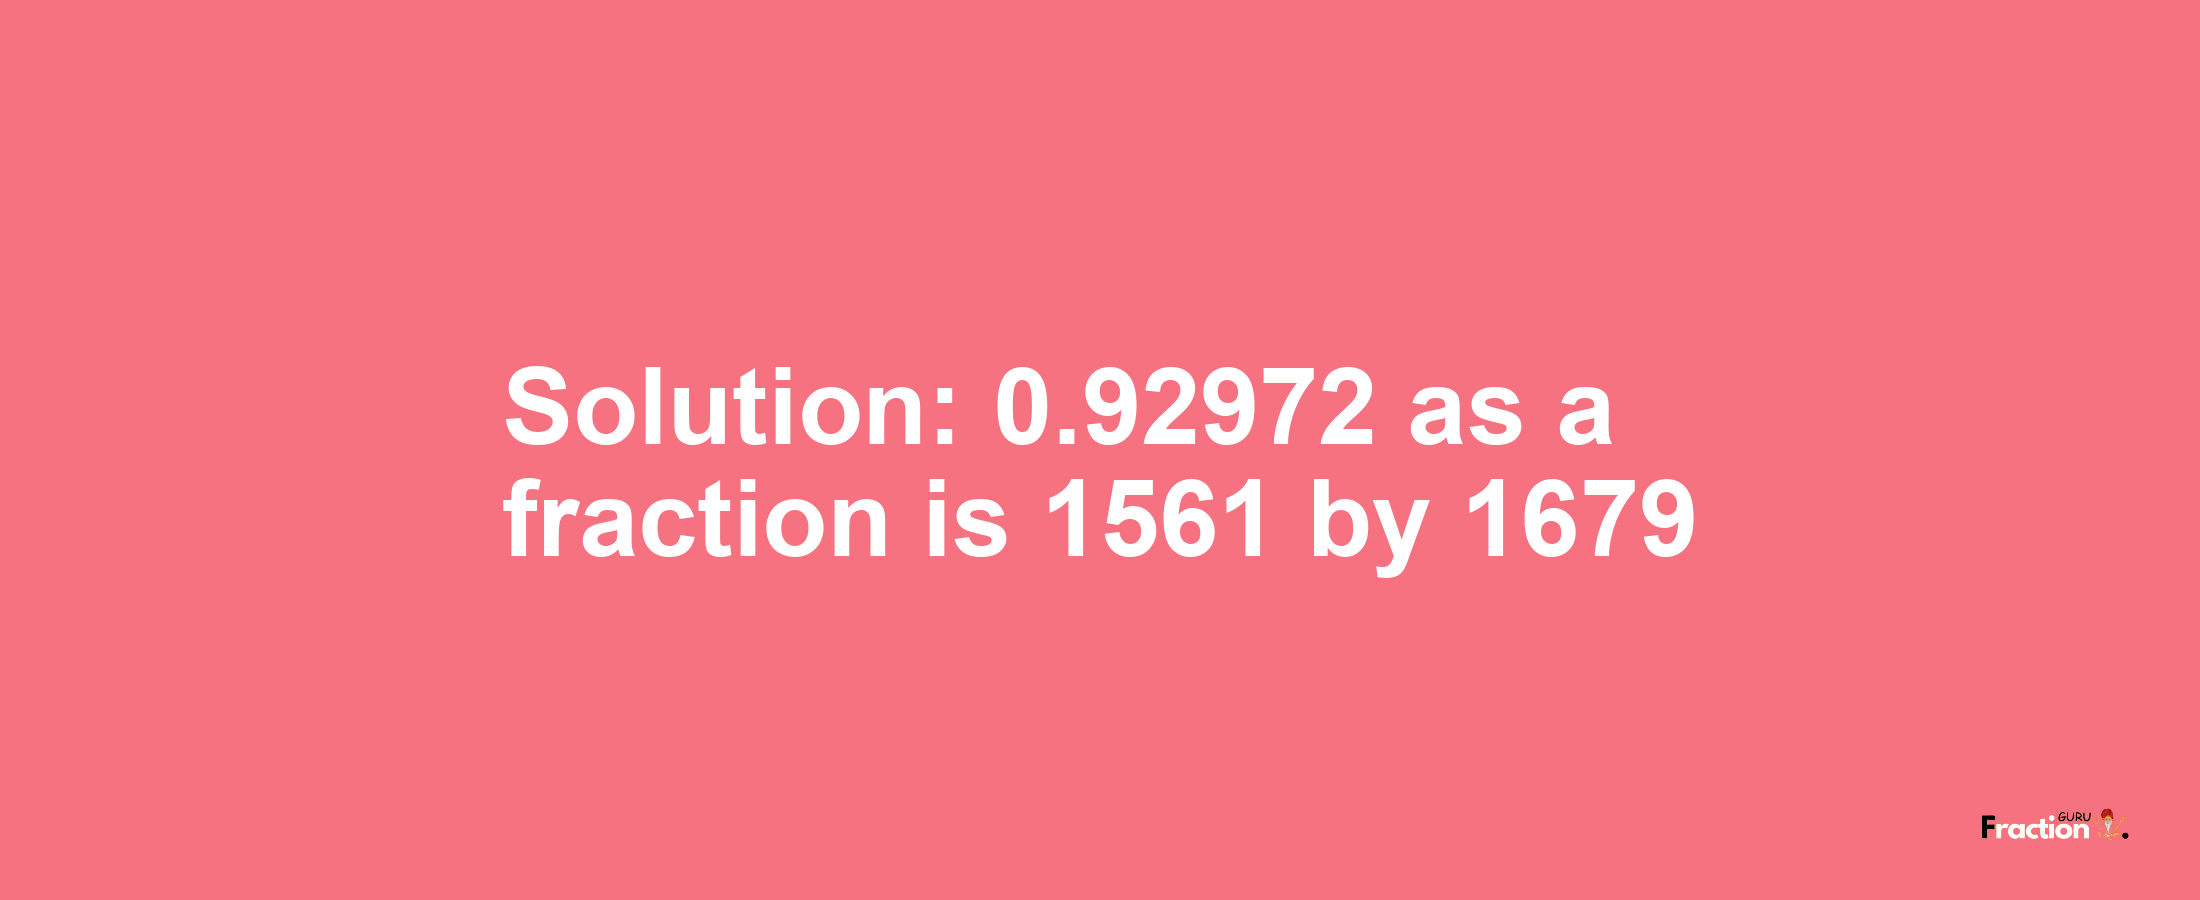 Solution:0.92972 as a fraction is 1561/1679